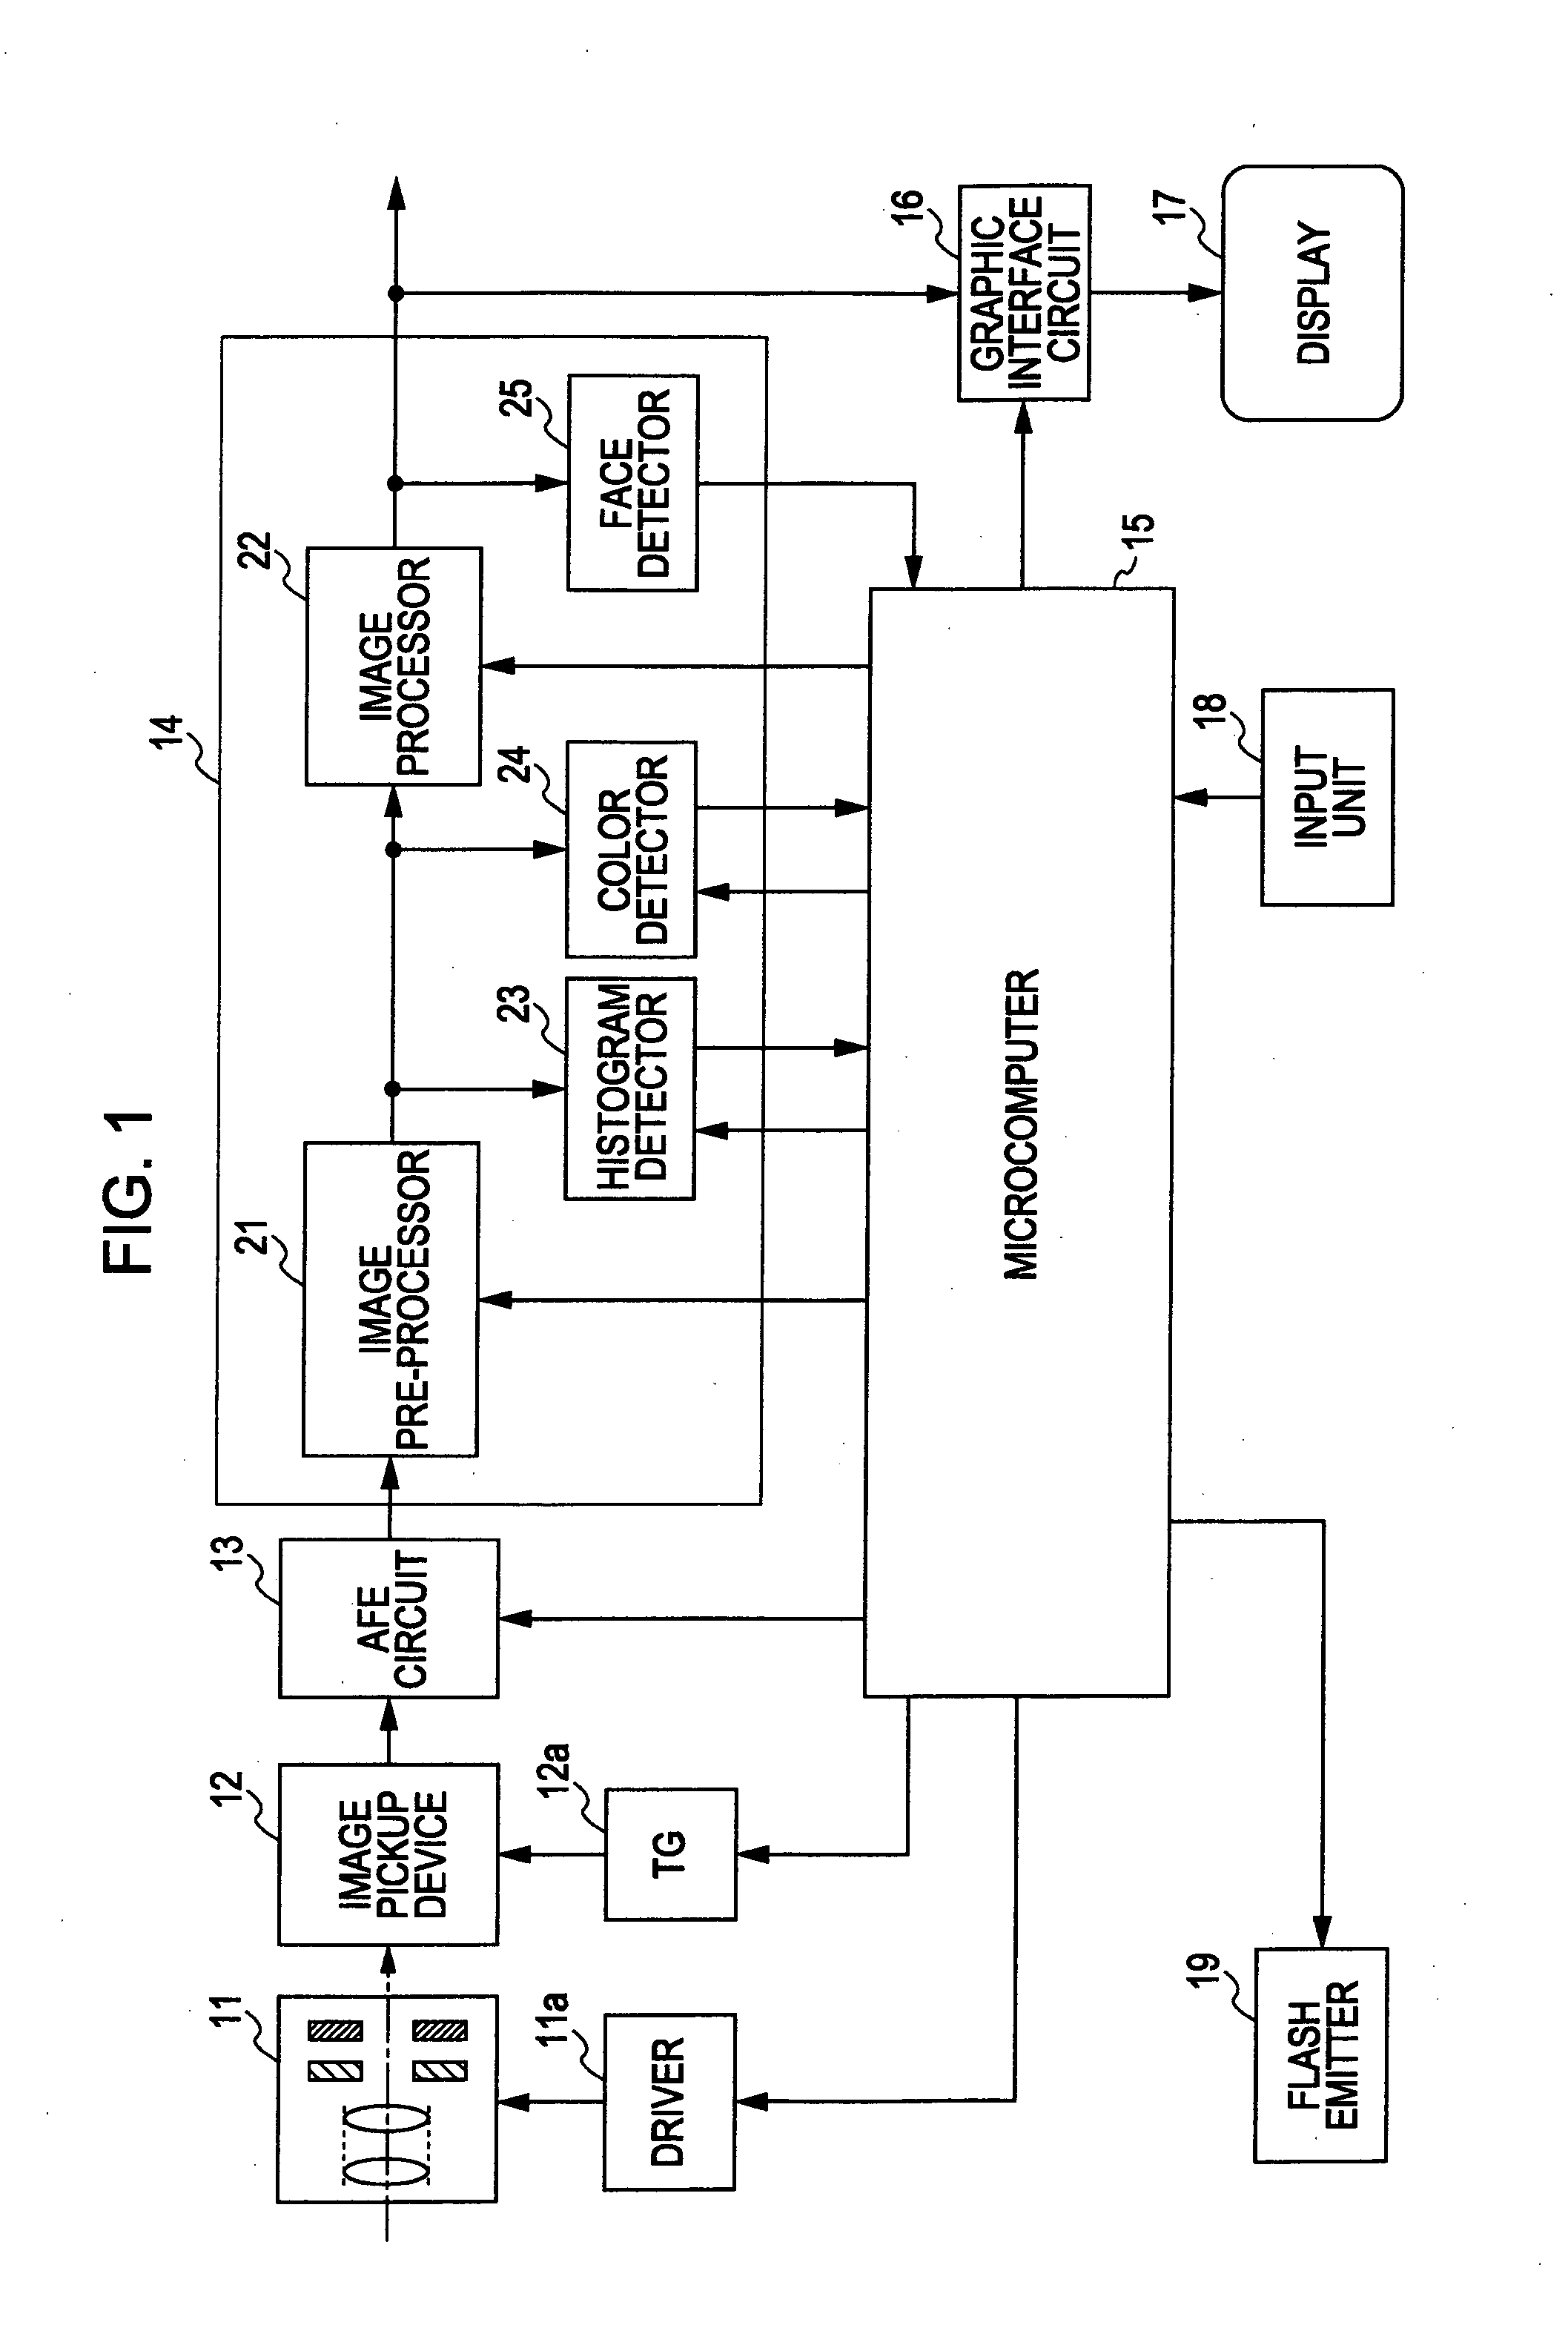 Face importance level determining apparatus and method, and image pickup apparatus